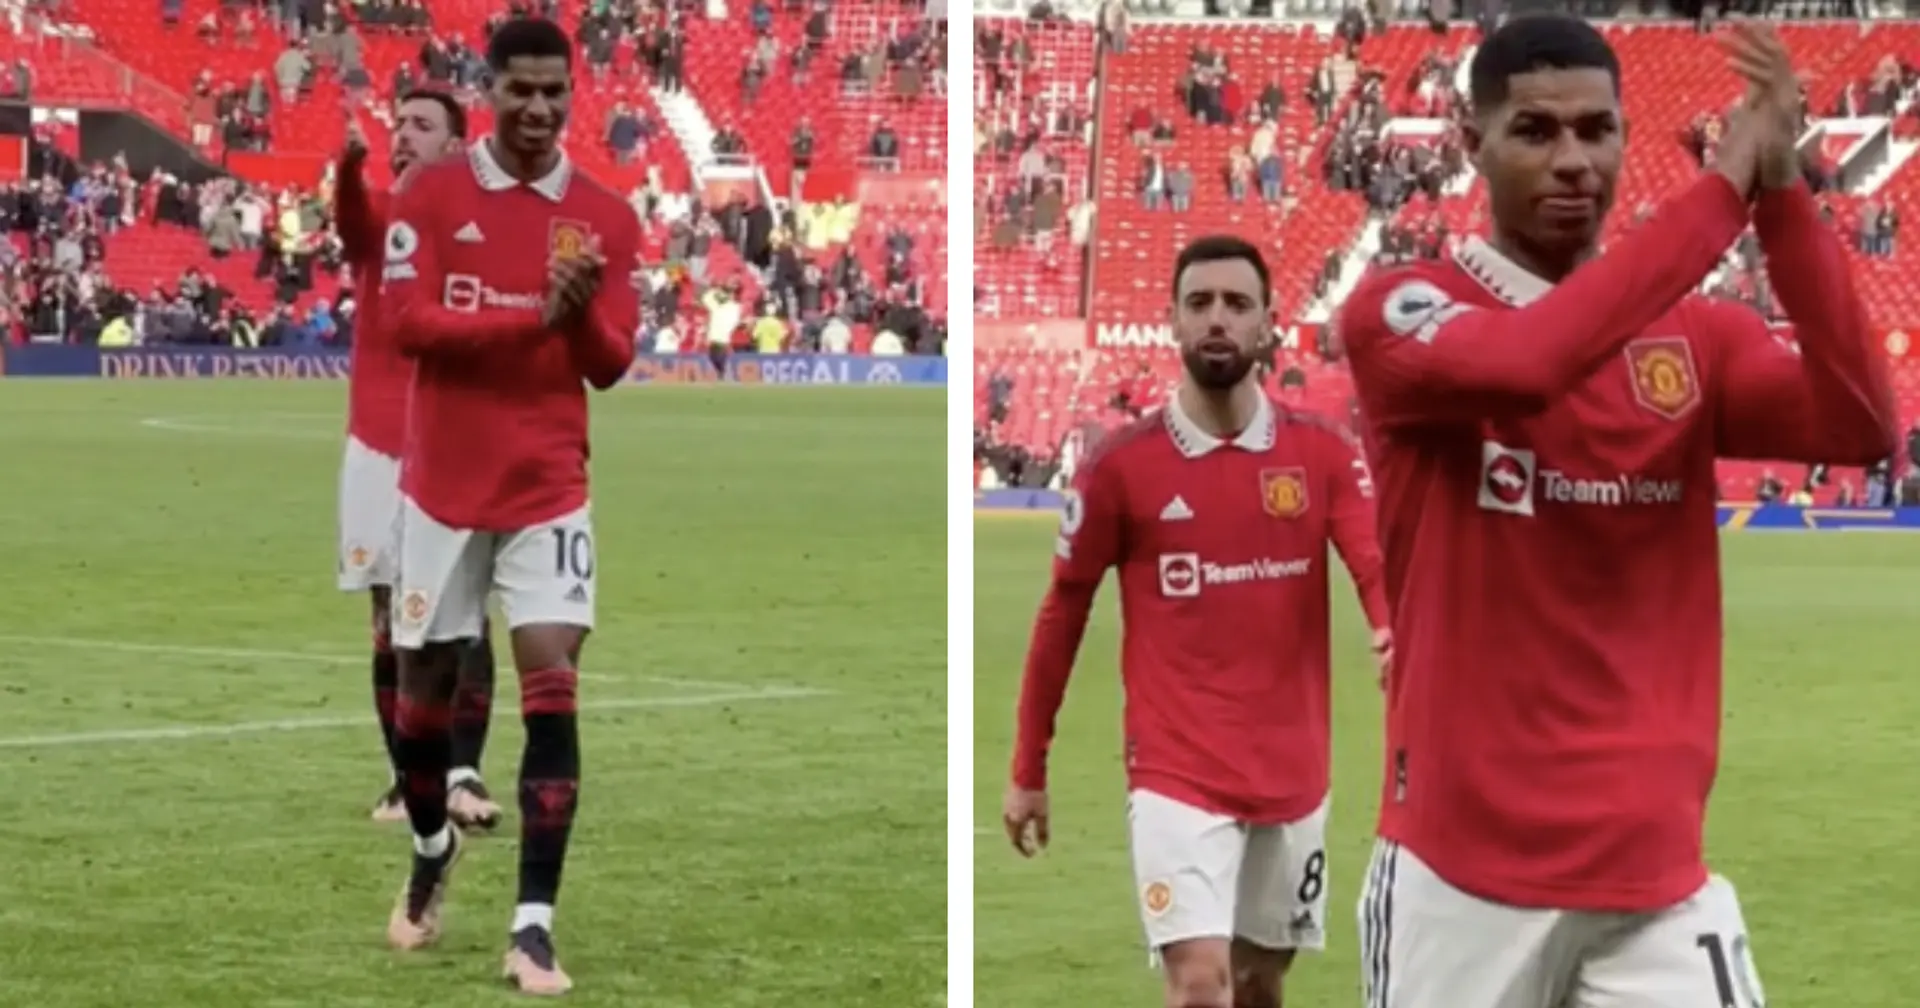 Caught on camera: Bruno Fernandes' gesture to Marcus Rashford after Man City win